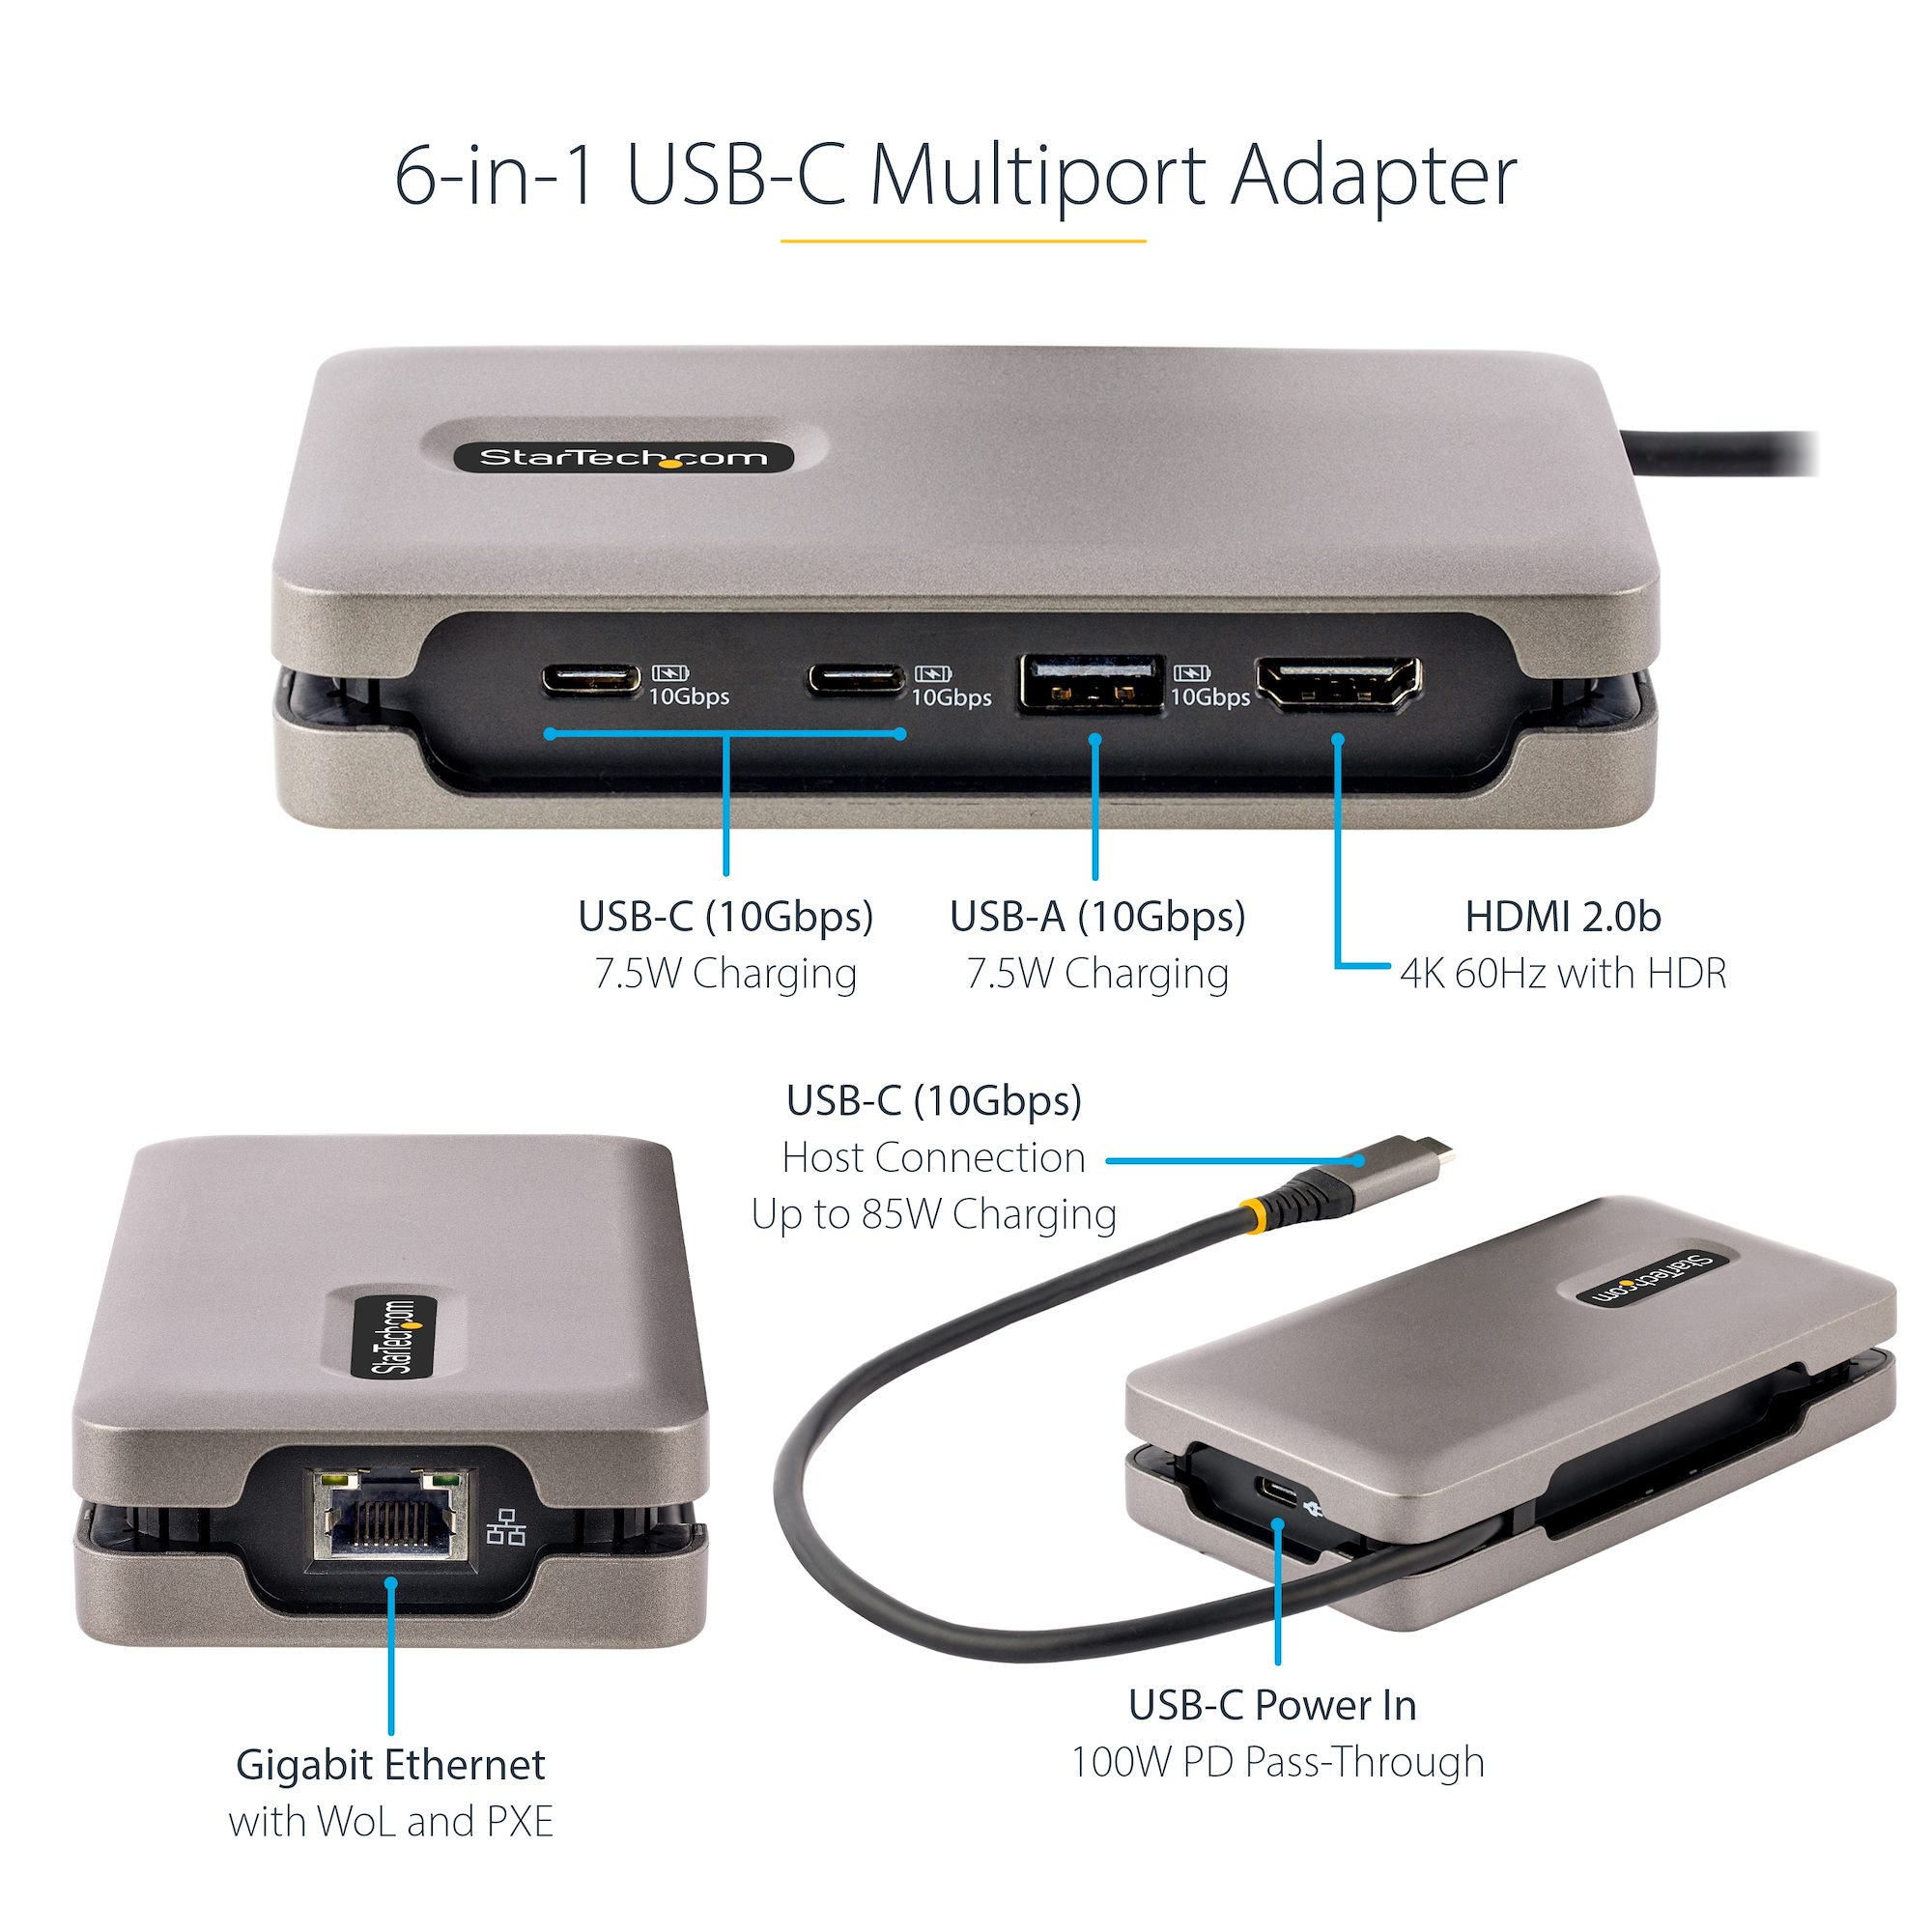 USB-C Multiport Adapter, 4K 60Hz HDMI, HDR - 2-Port 5Gbps USB 3.0 Hub, 100W  Power Delivery Pass-Through, GbE, USB Type C Mini Docking Station